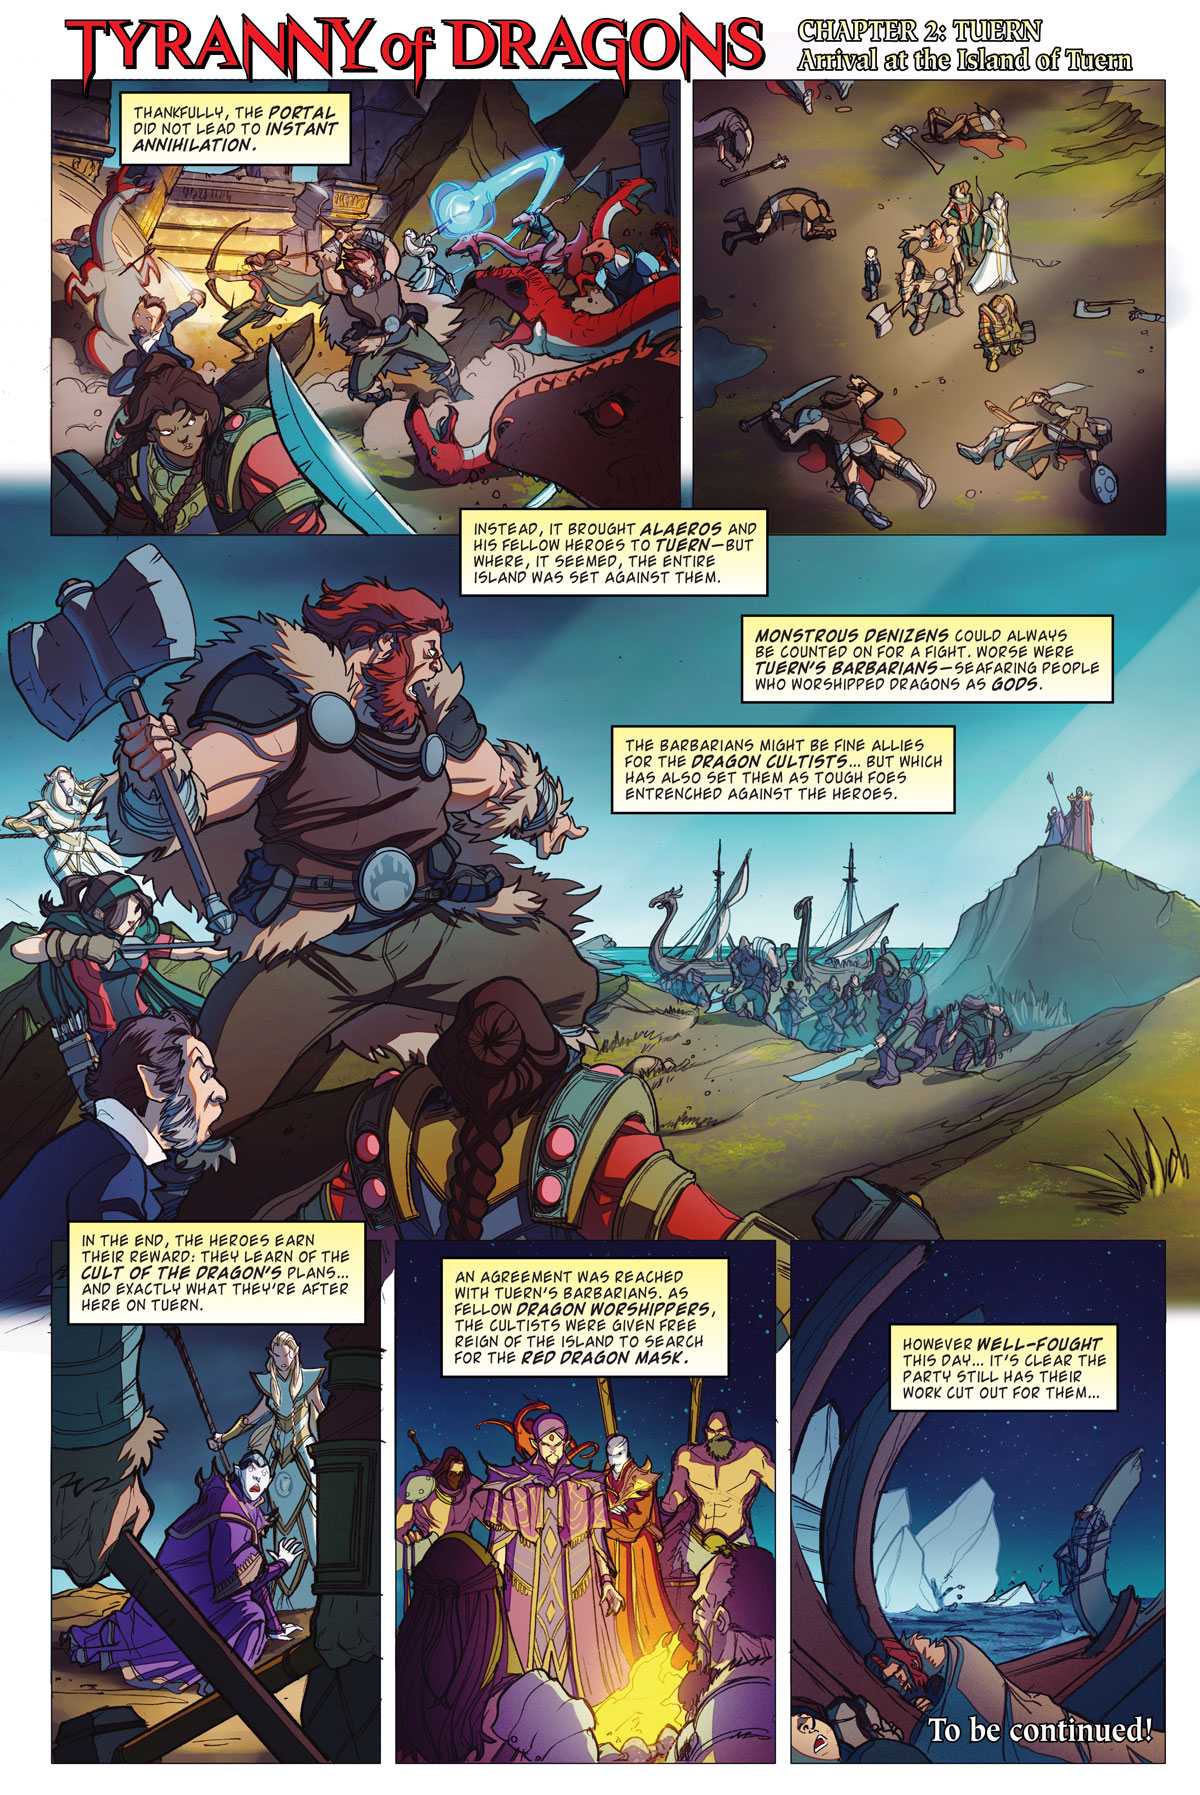 Tyranny Of Dragons Online Comic 3 Dungeons Dragons